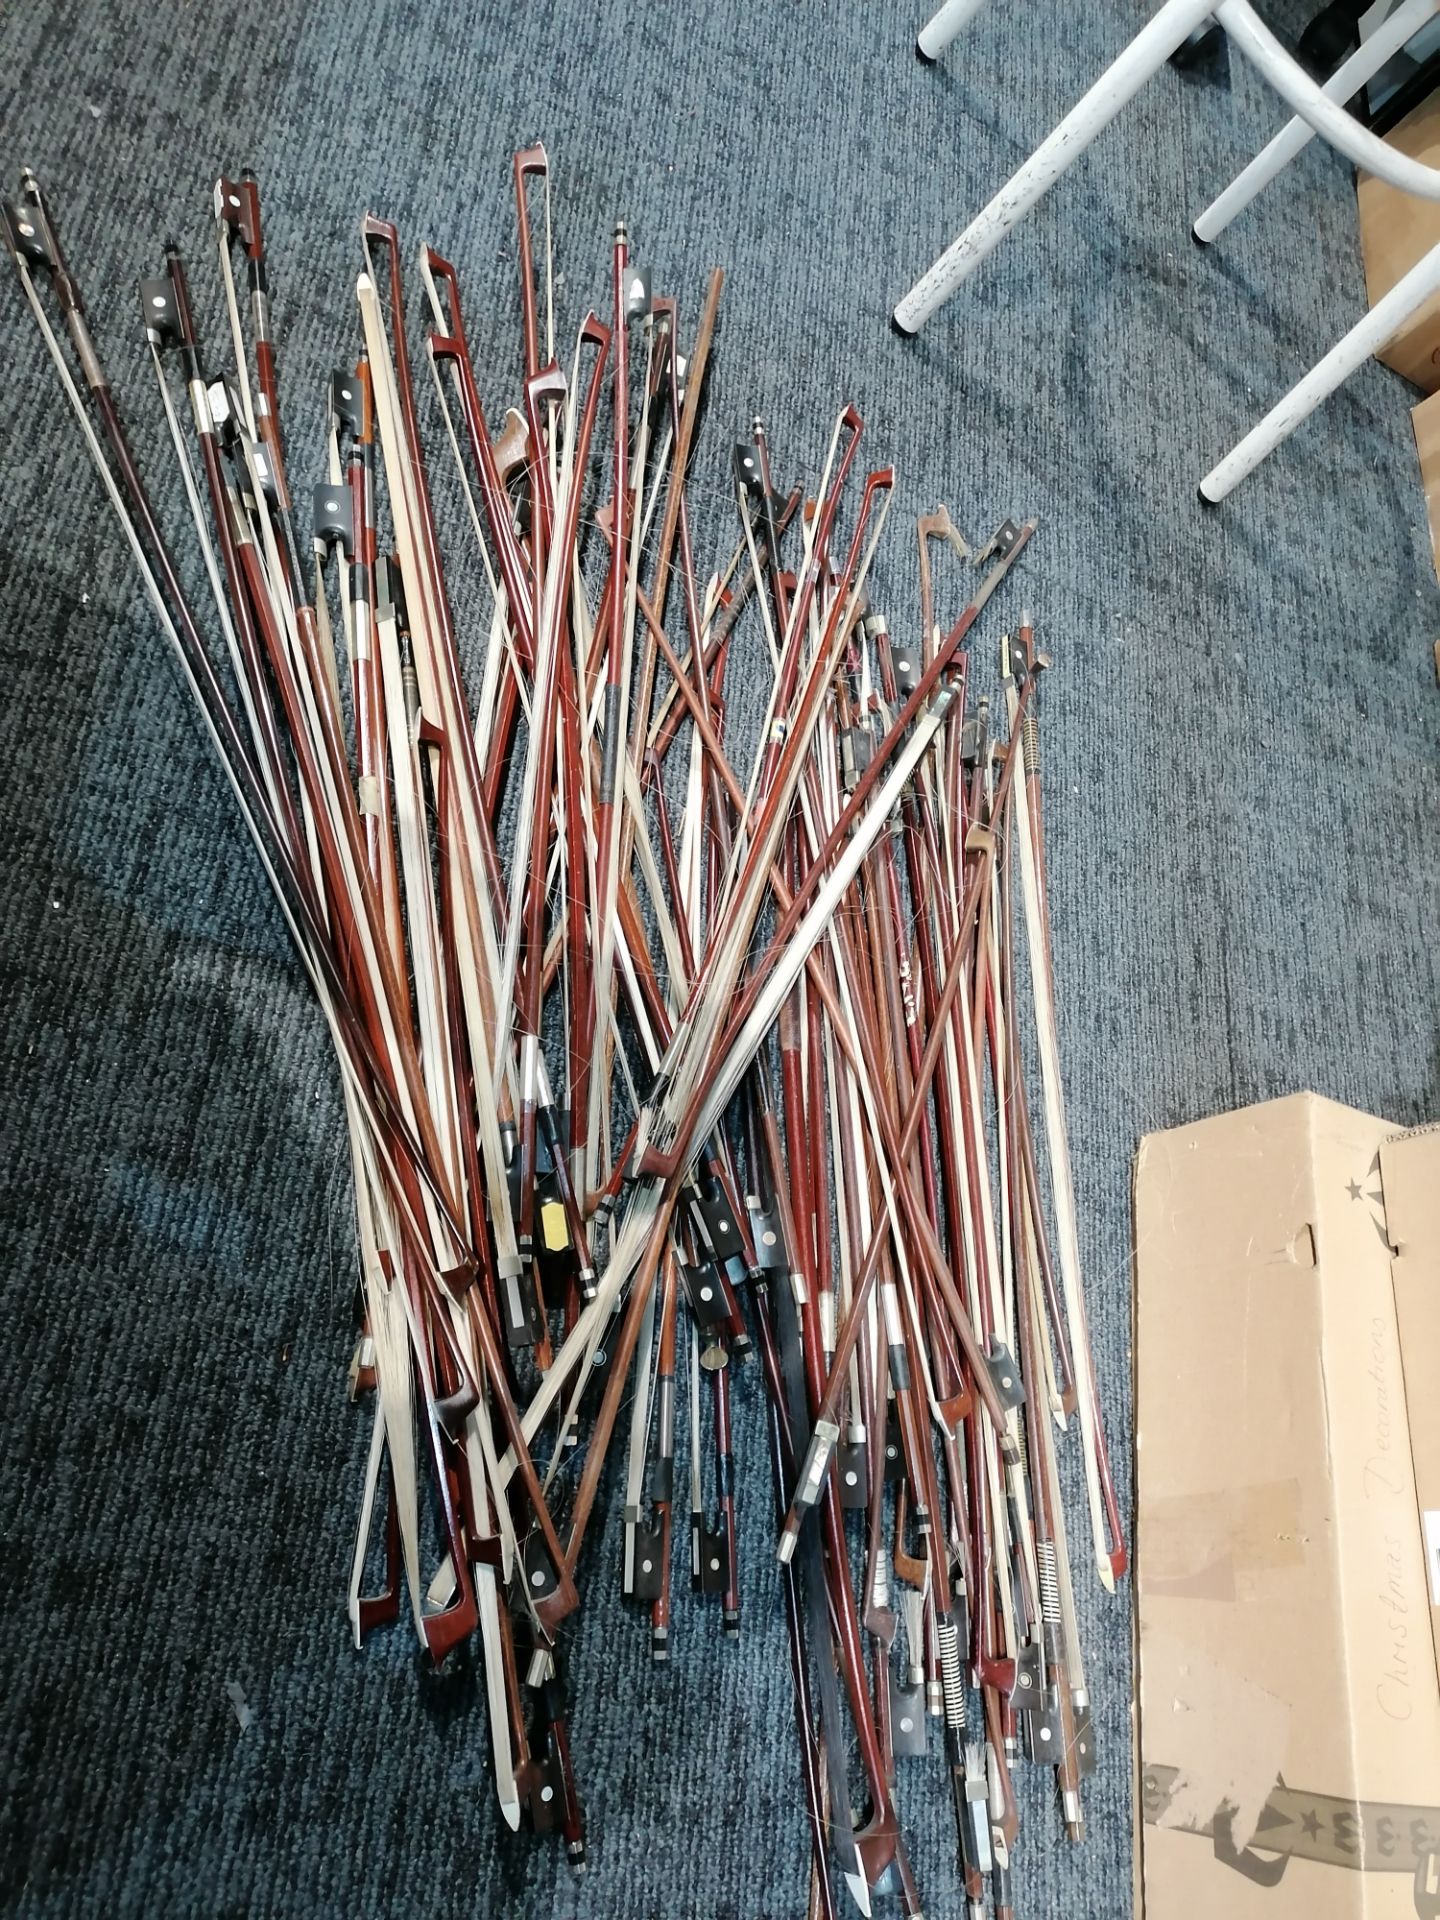 Used Instrument Bows - Image 2 of 8